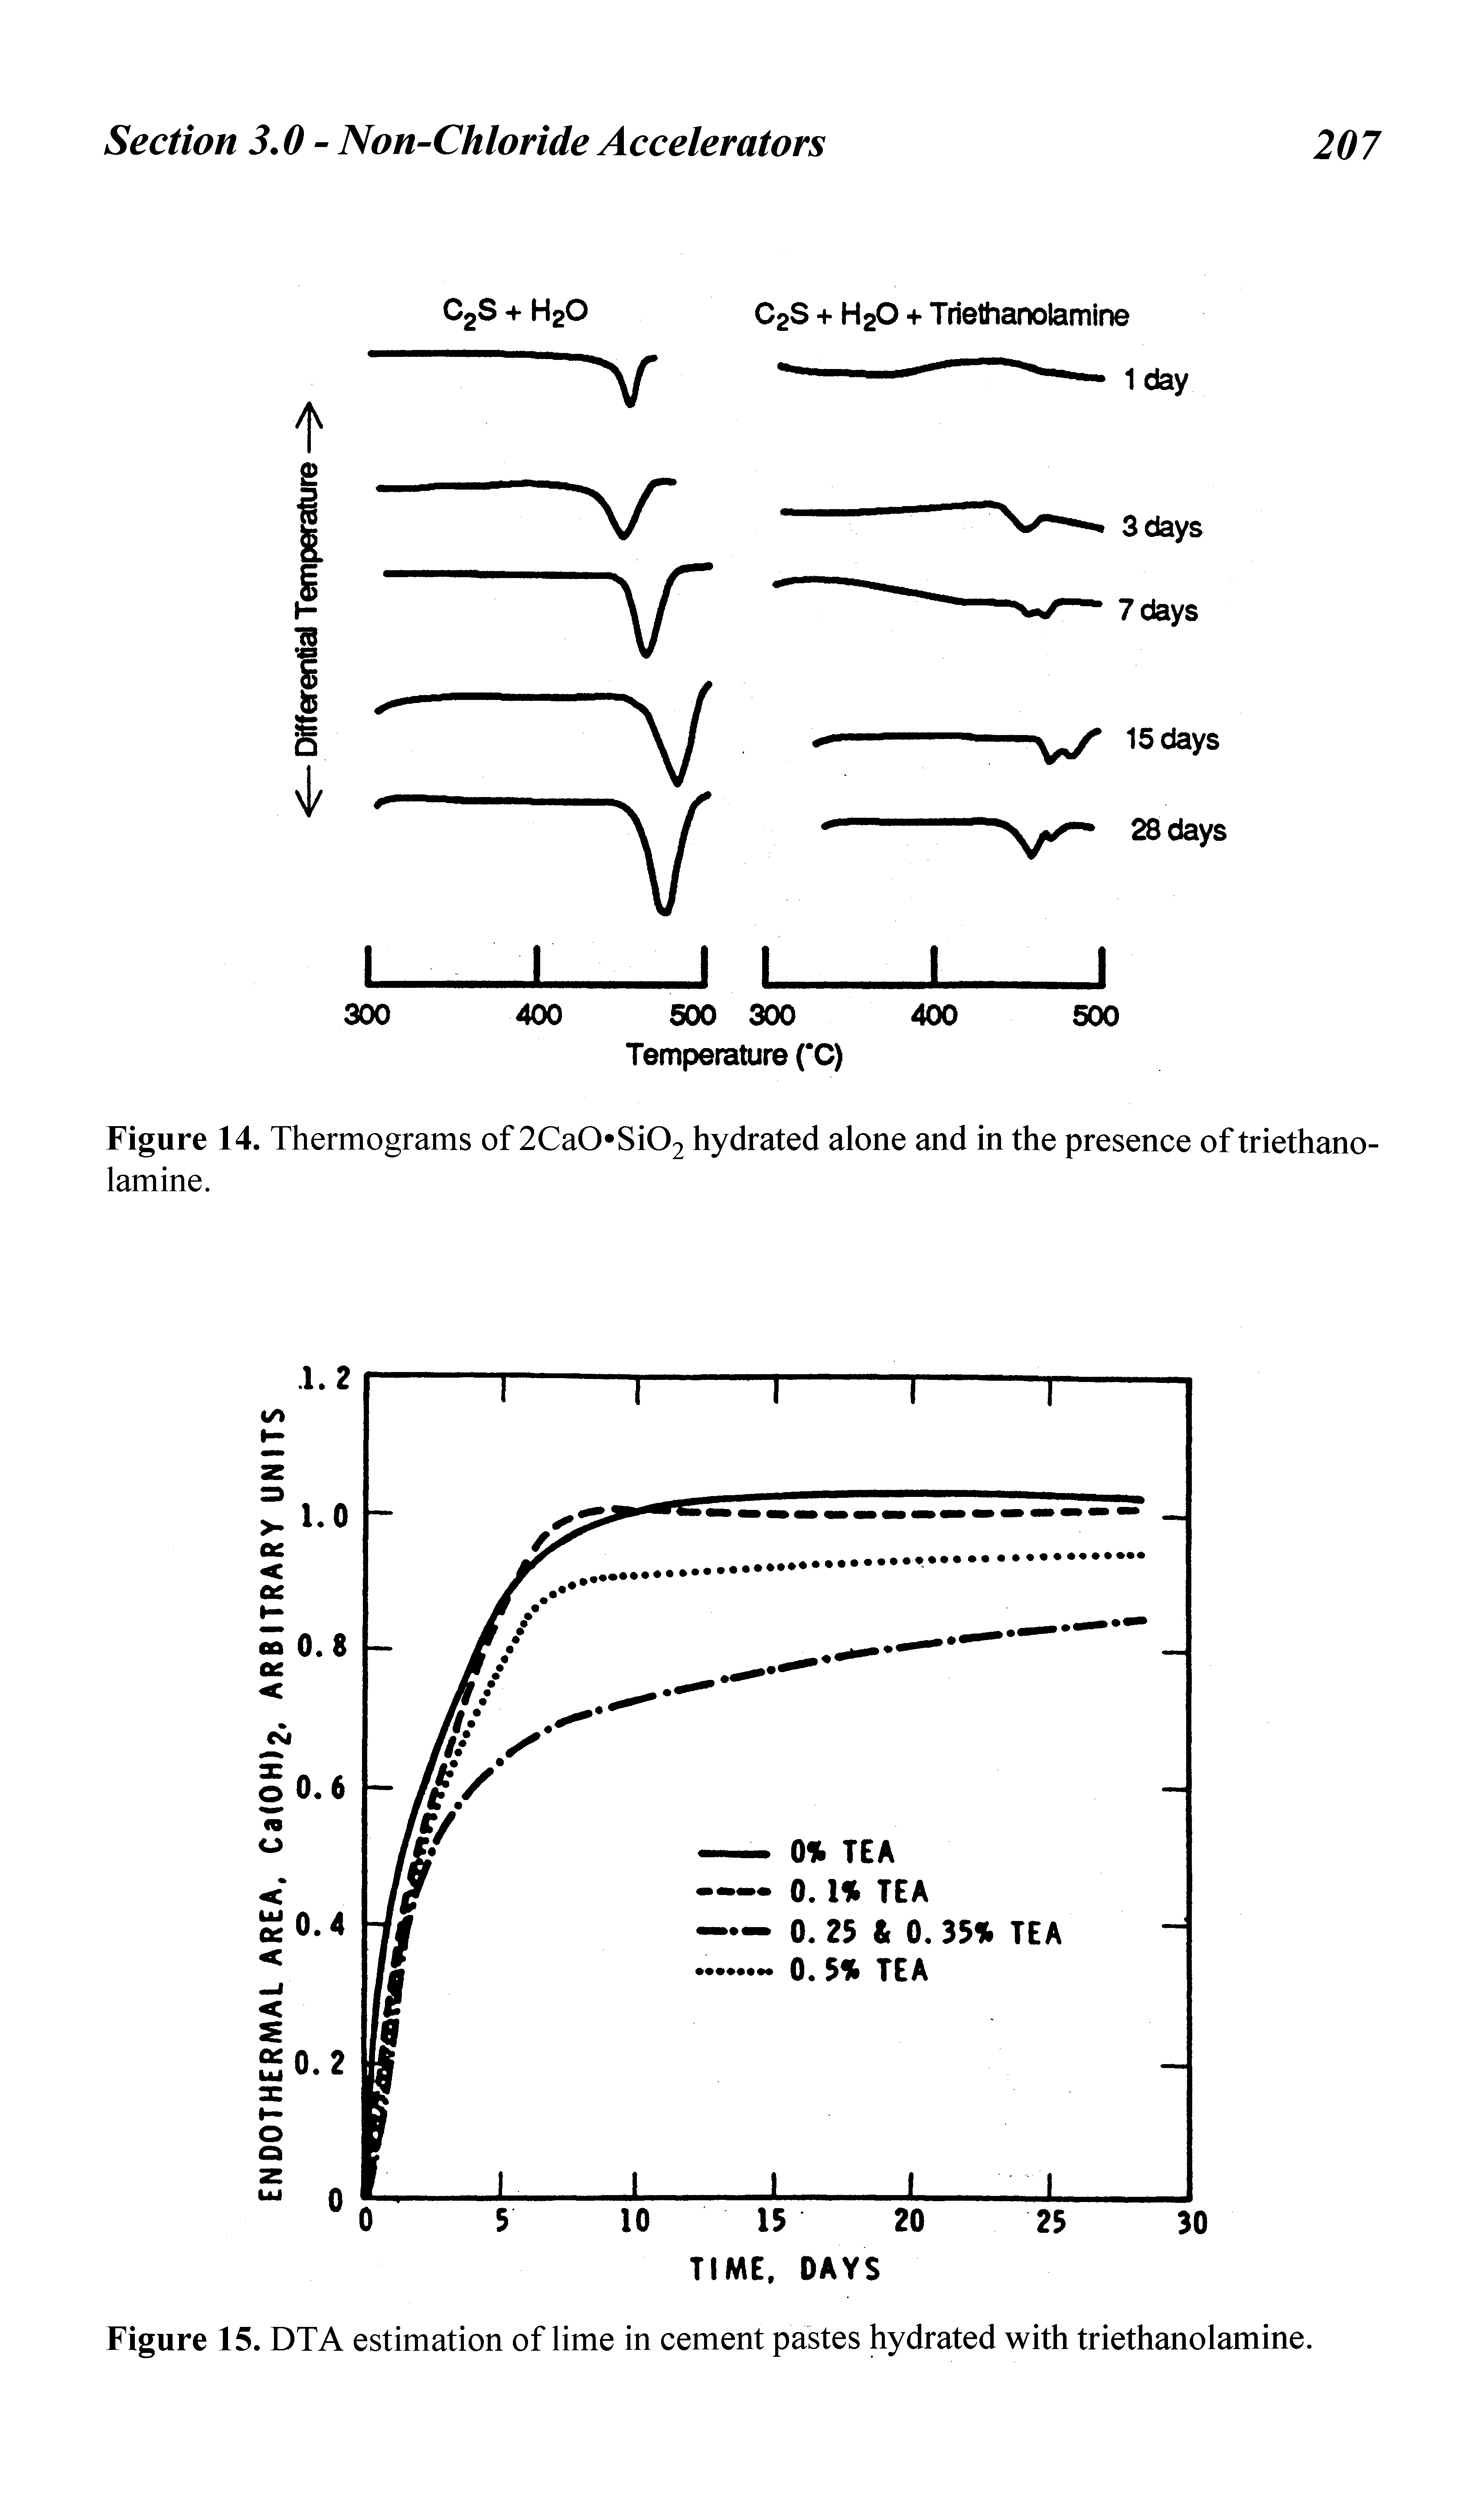 Figure 15. DTA estimation of lime in cement pastes hydrated with triethanolamine.